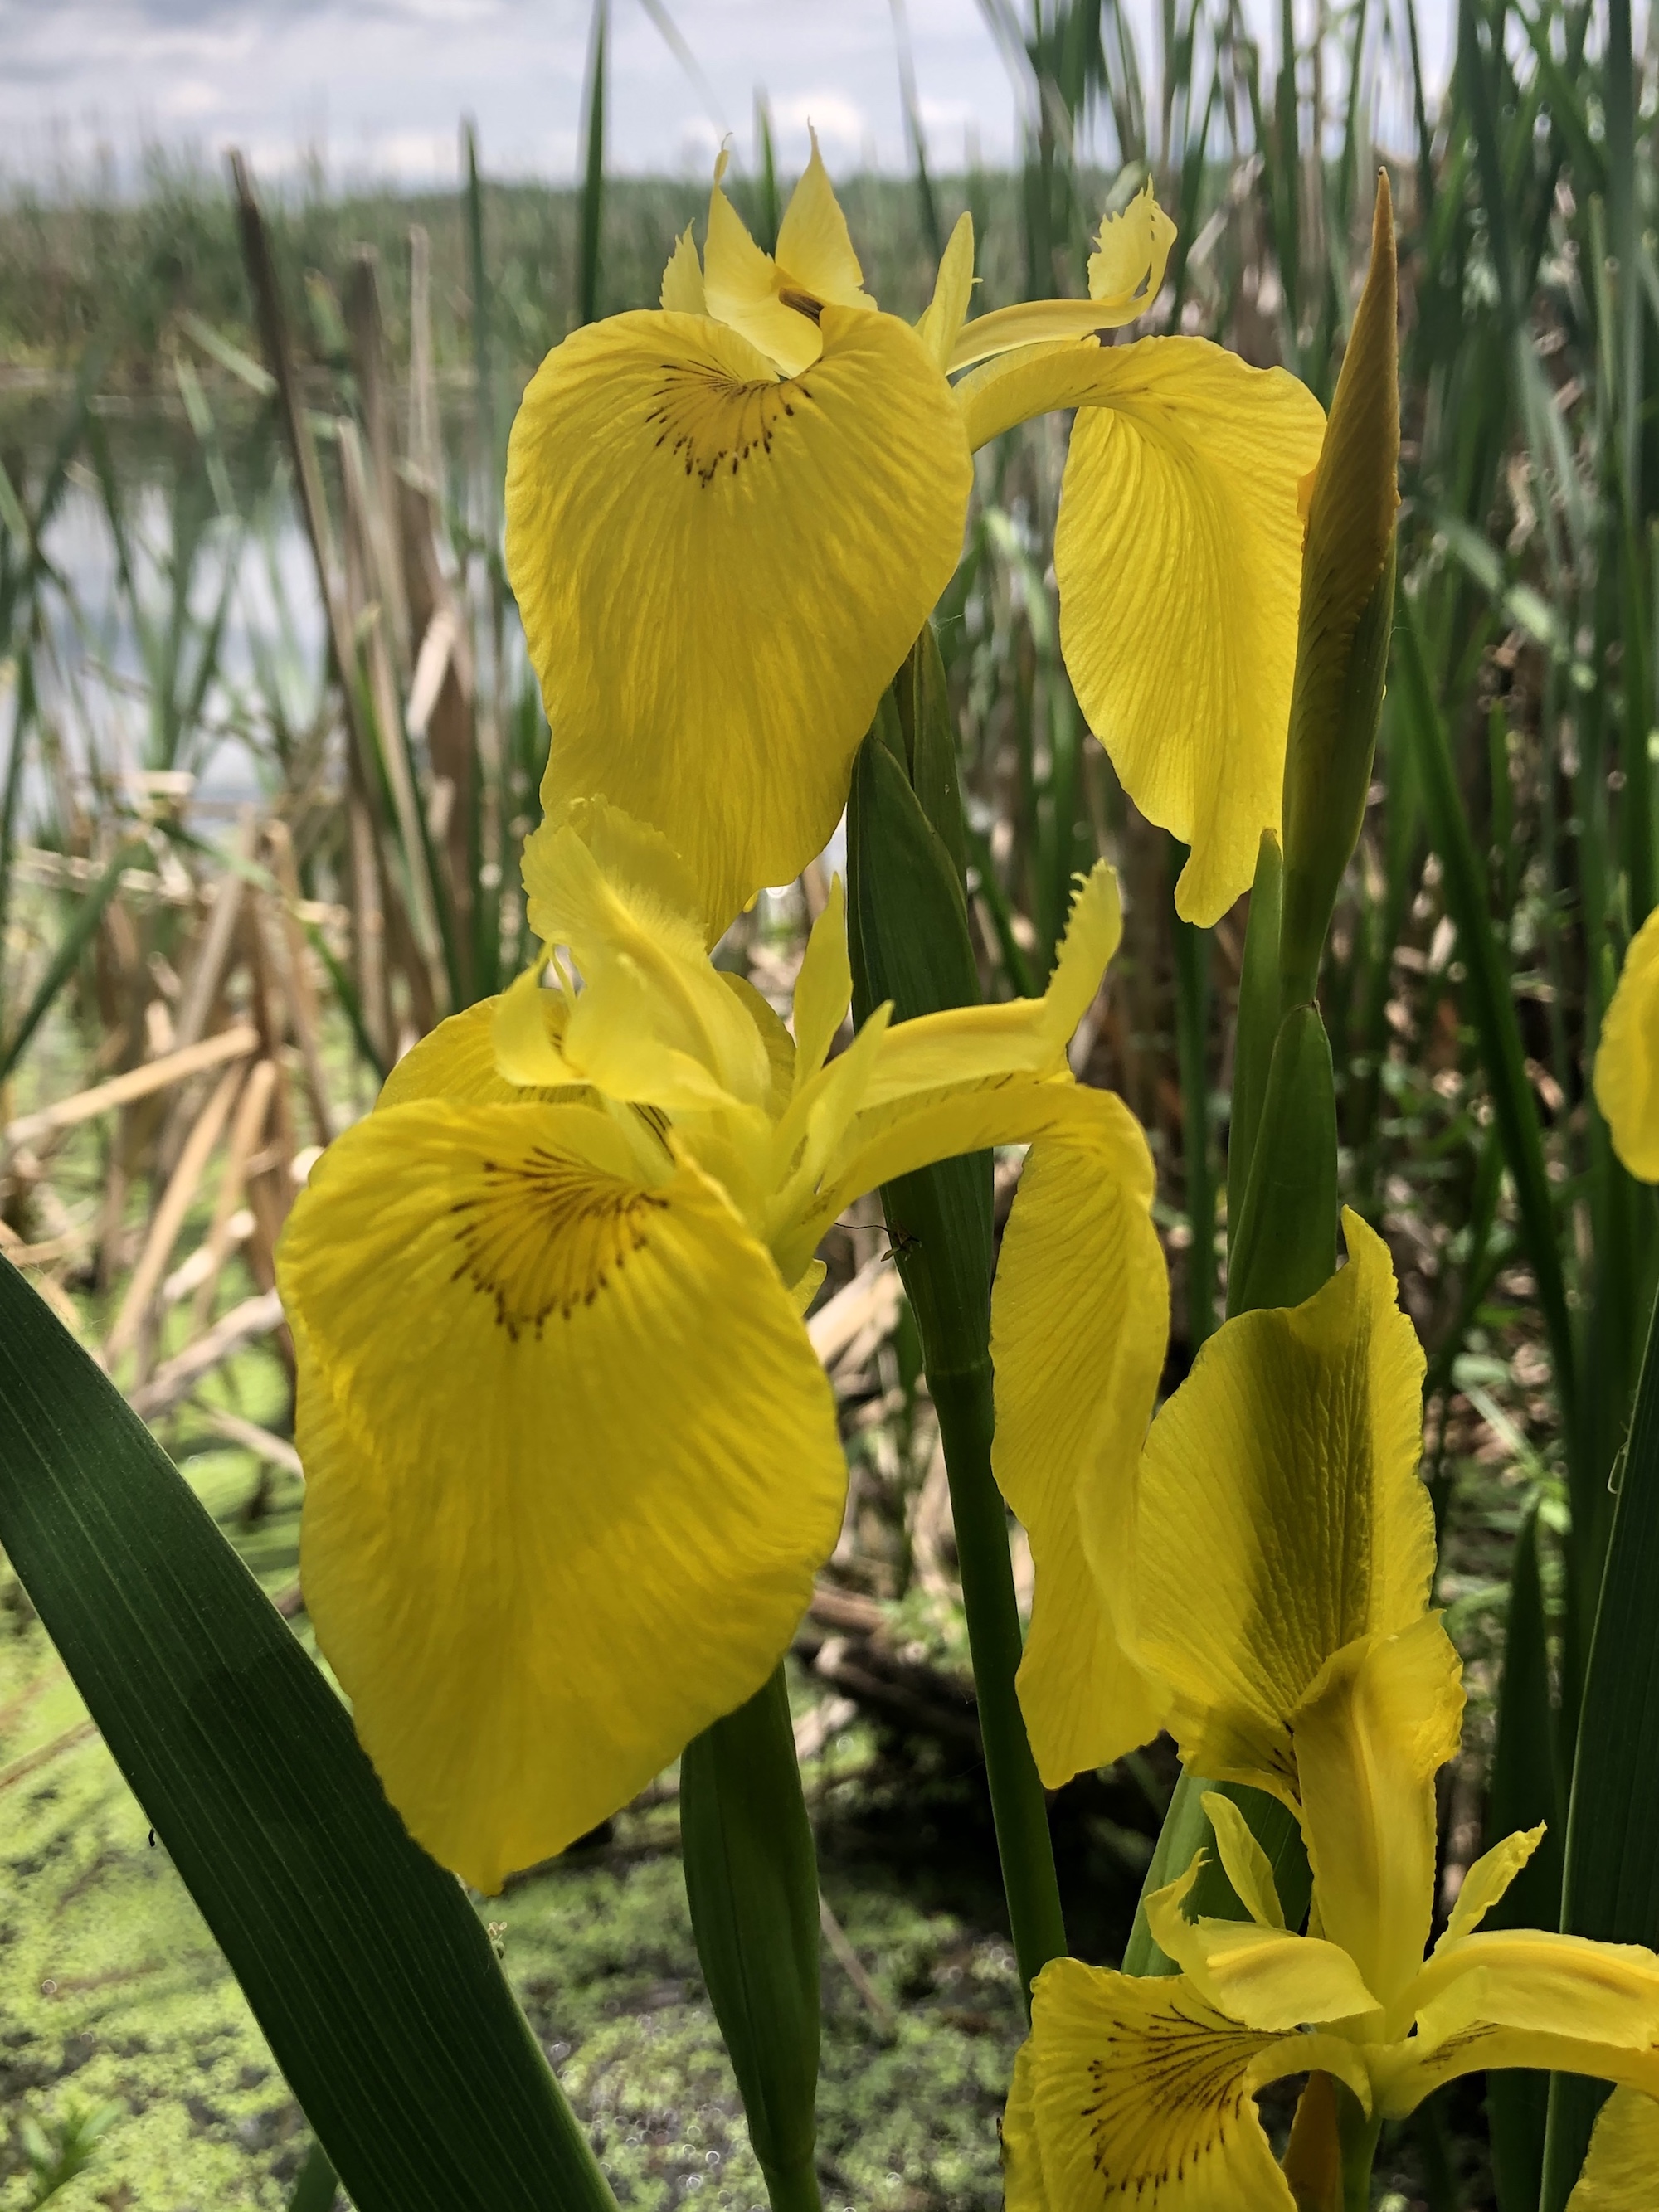 Cattails growing with Yellow Flag Iris on Lake Wingra on June 5, 2020.